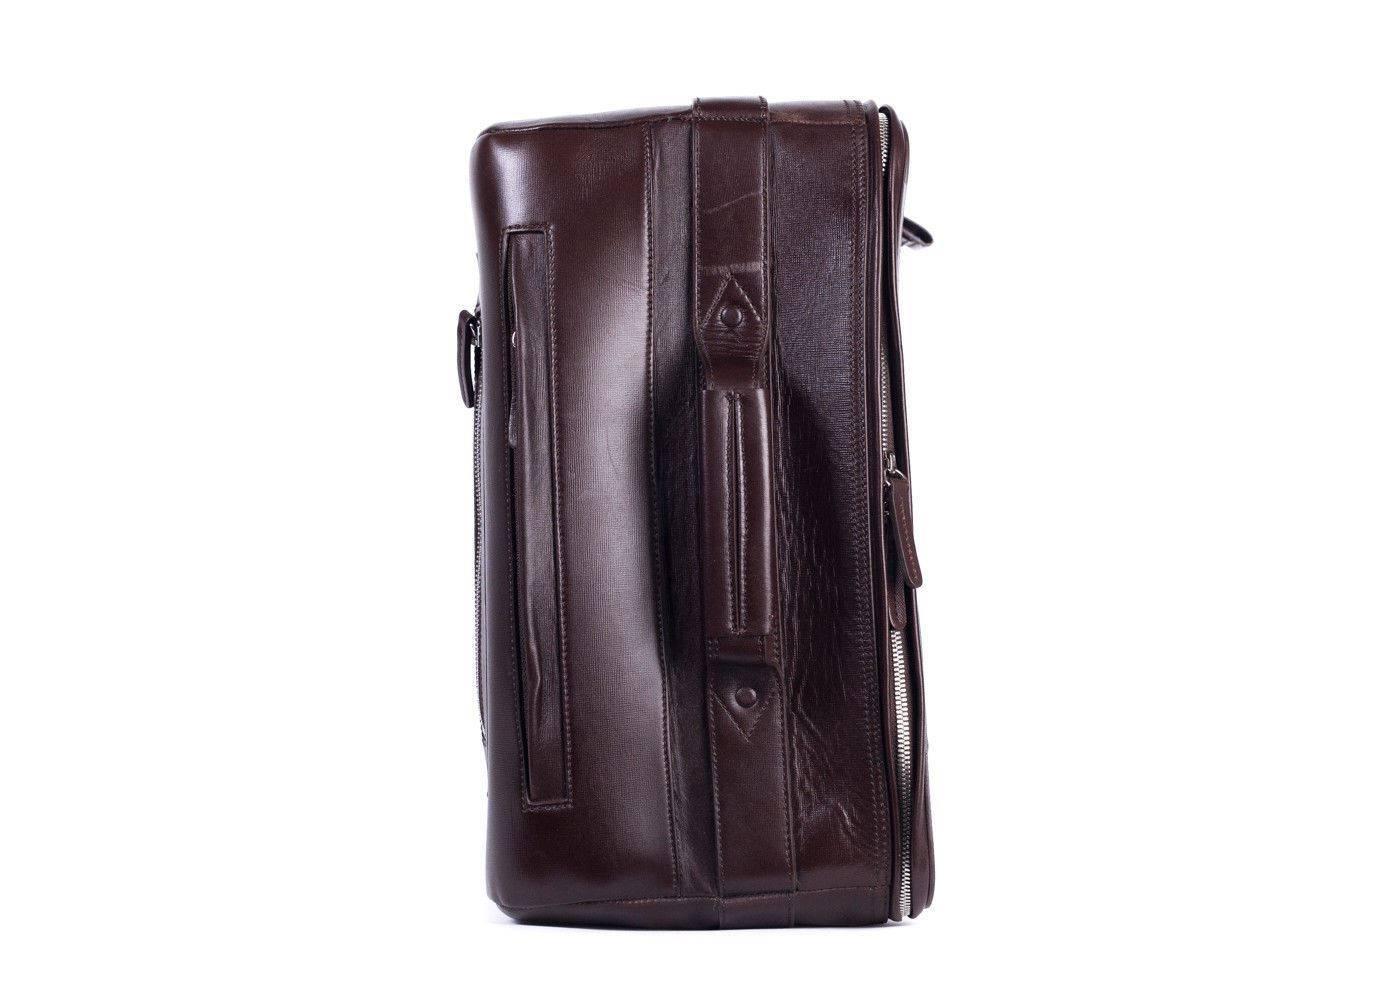 Brand New Brunello Cucinelli Suitcase
Dust Bag Included
Retails in Stores & Online for $4995
Dimensions: 21